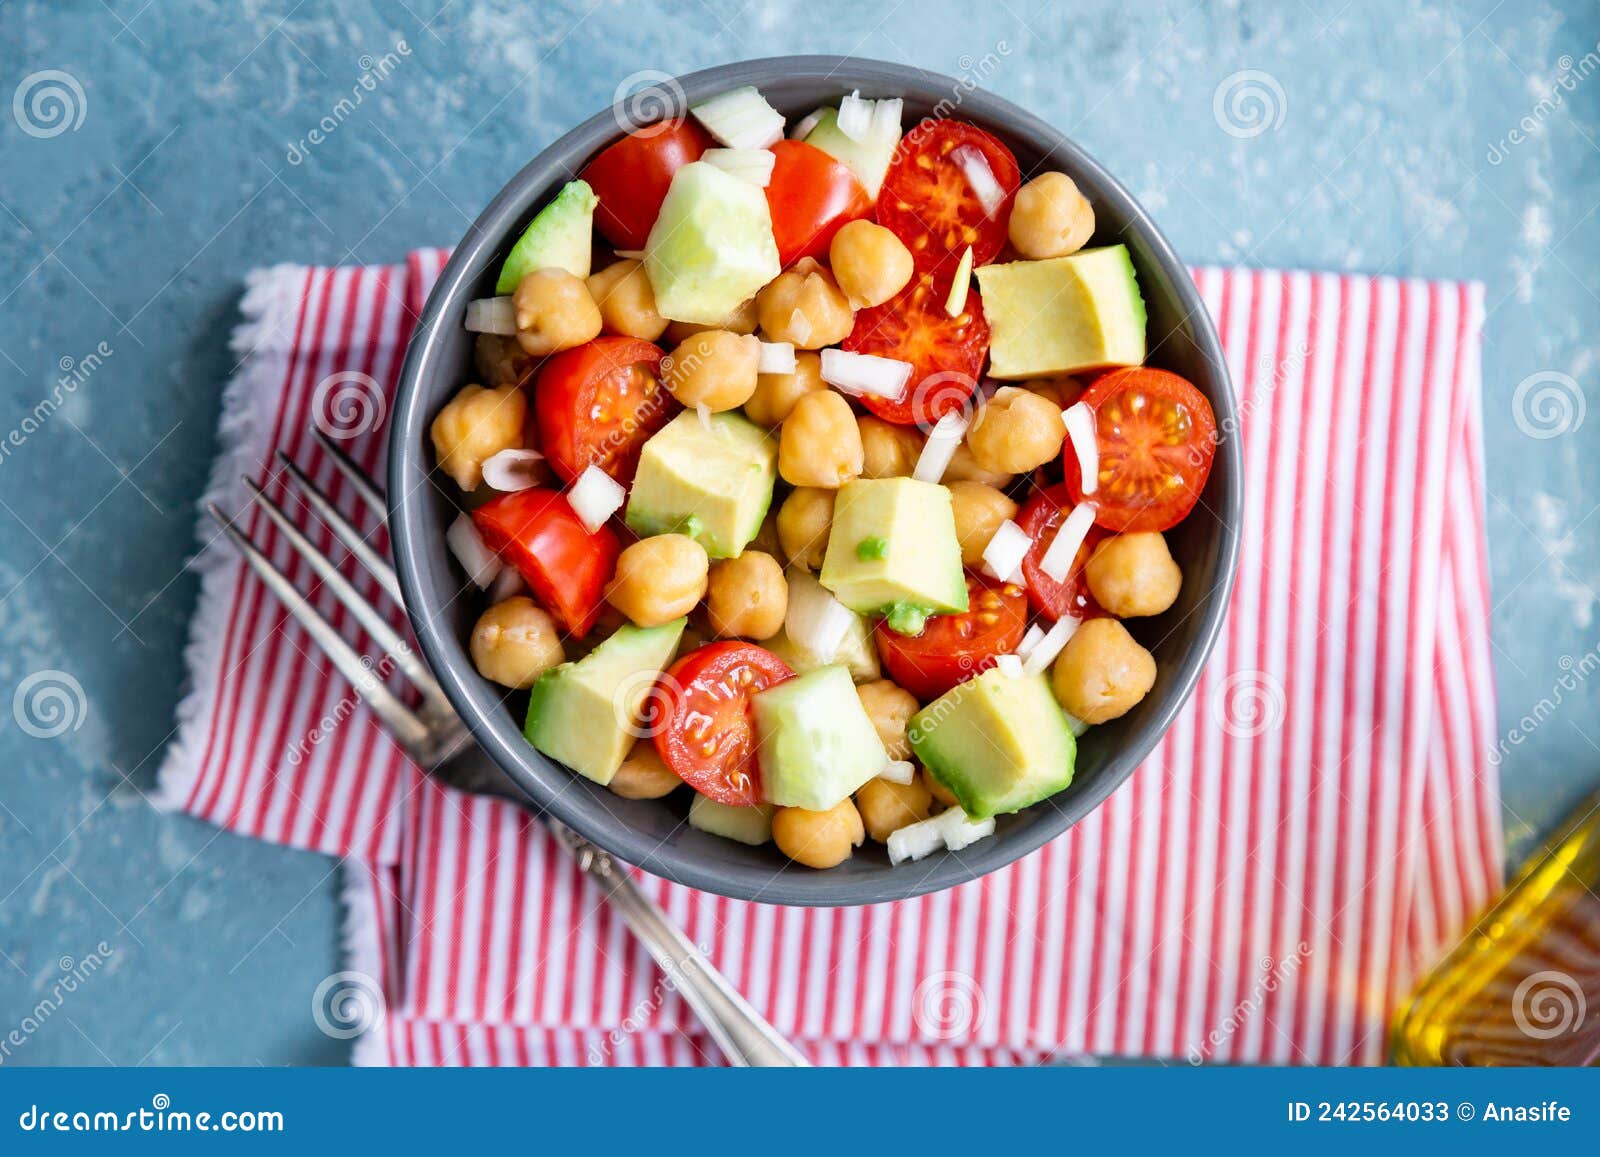 delicious chickpea salad with cherry tomato, avocado and cucumber